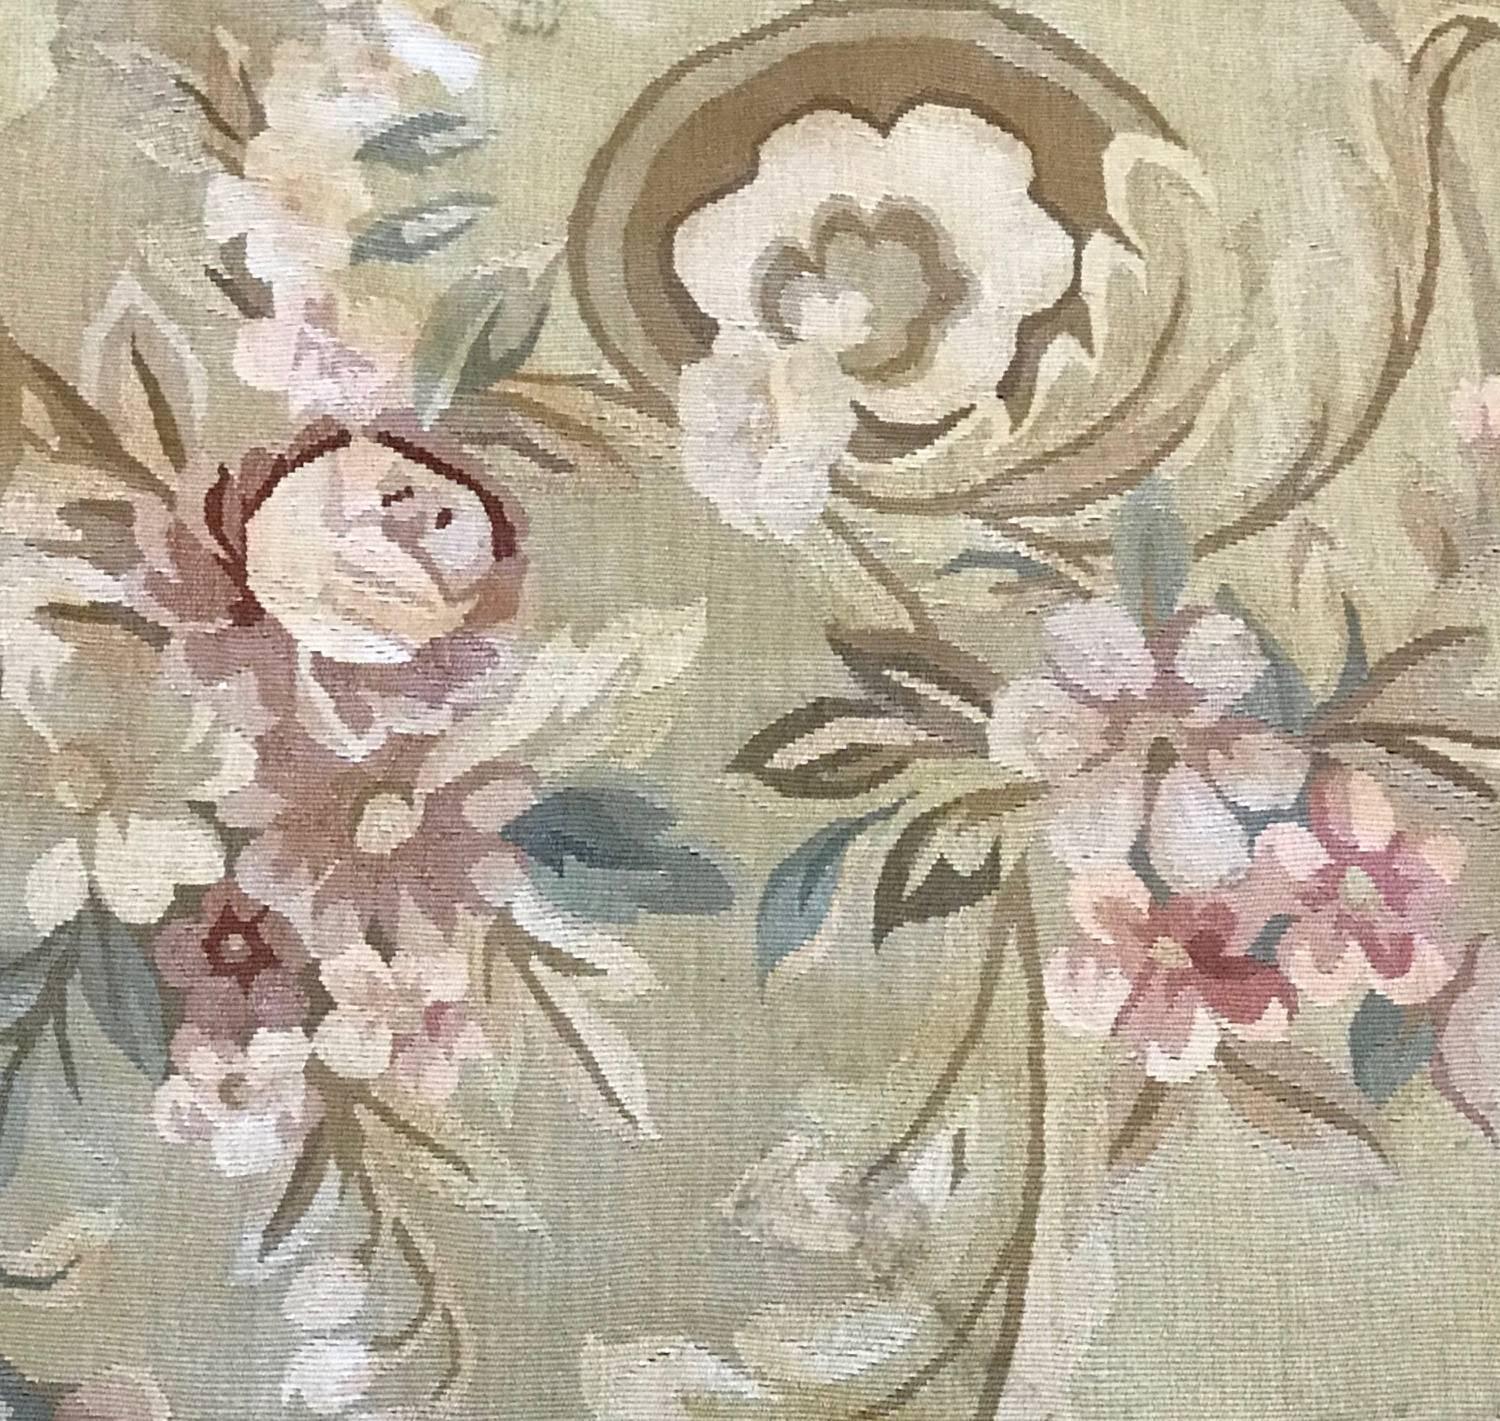 Wonderful French Aubusson flat handwoven tapestry rug of elegant design with subdued colors and delicate floral motifs.
Rich and soft ivory ground decorated around a centered floral medallion banded with floral sprays and acanthus leaves.